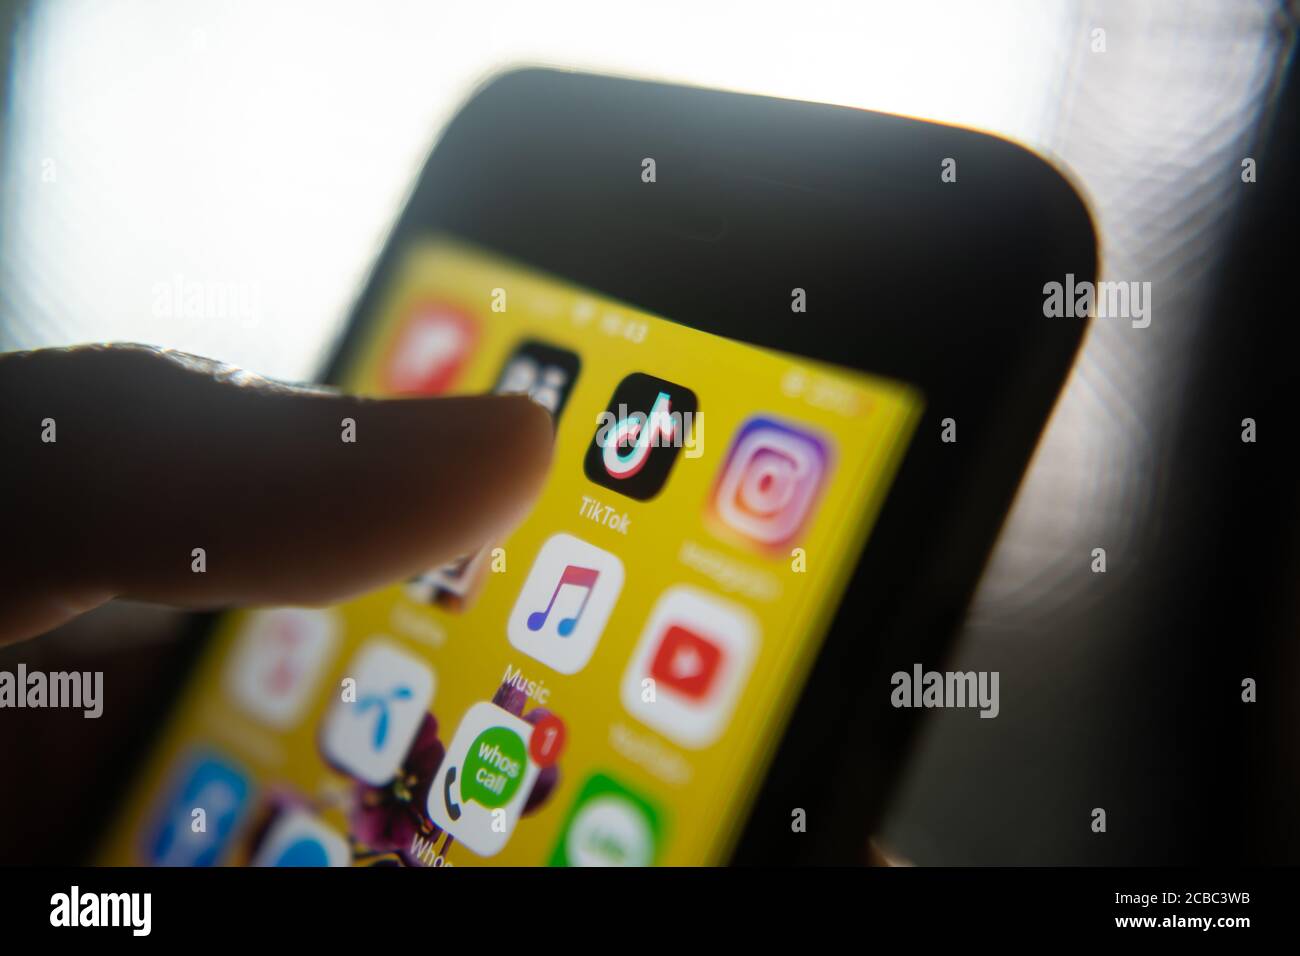 Bangkok, Thailand - August 12, 2020 : iPhone 7 showing its screen with TikTok and other application icons. Stock Photo